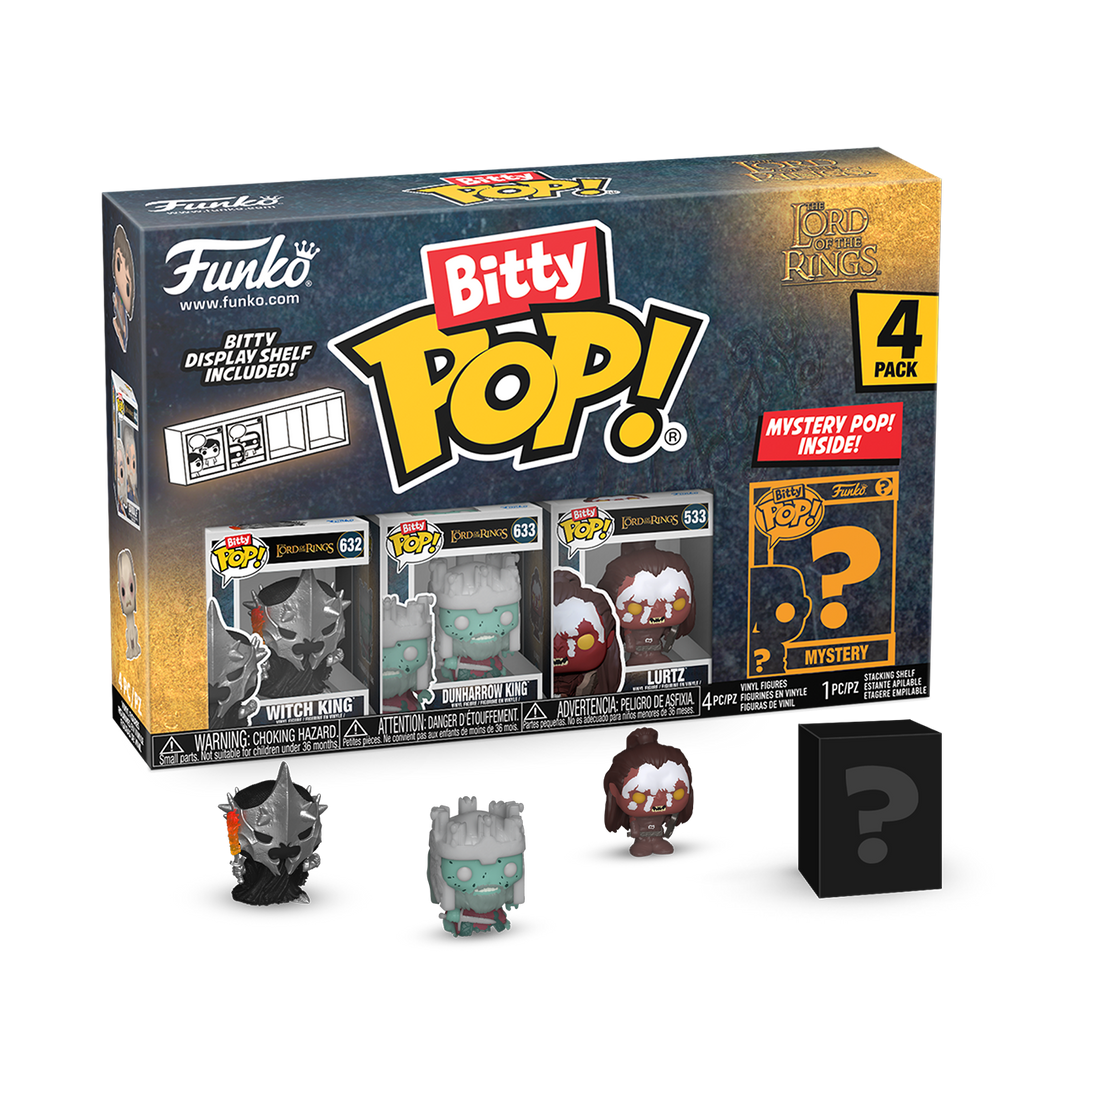 Funko Pop - Lord of the Rings - Funko Bitty POP 4 Packs Witch King